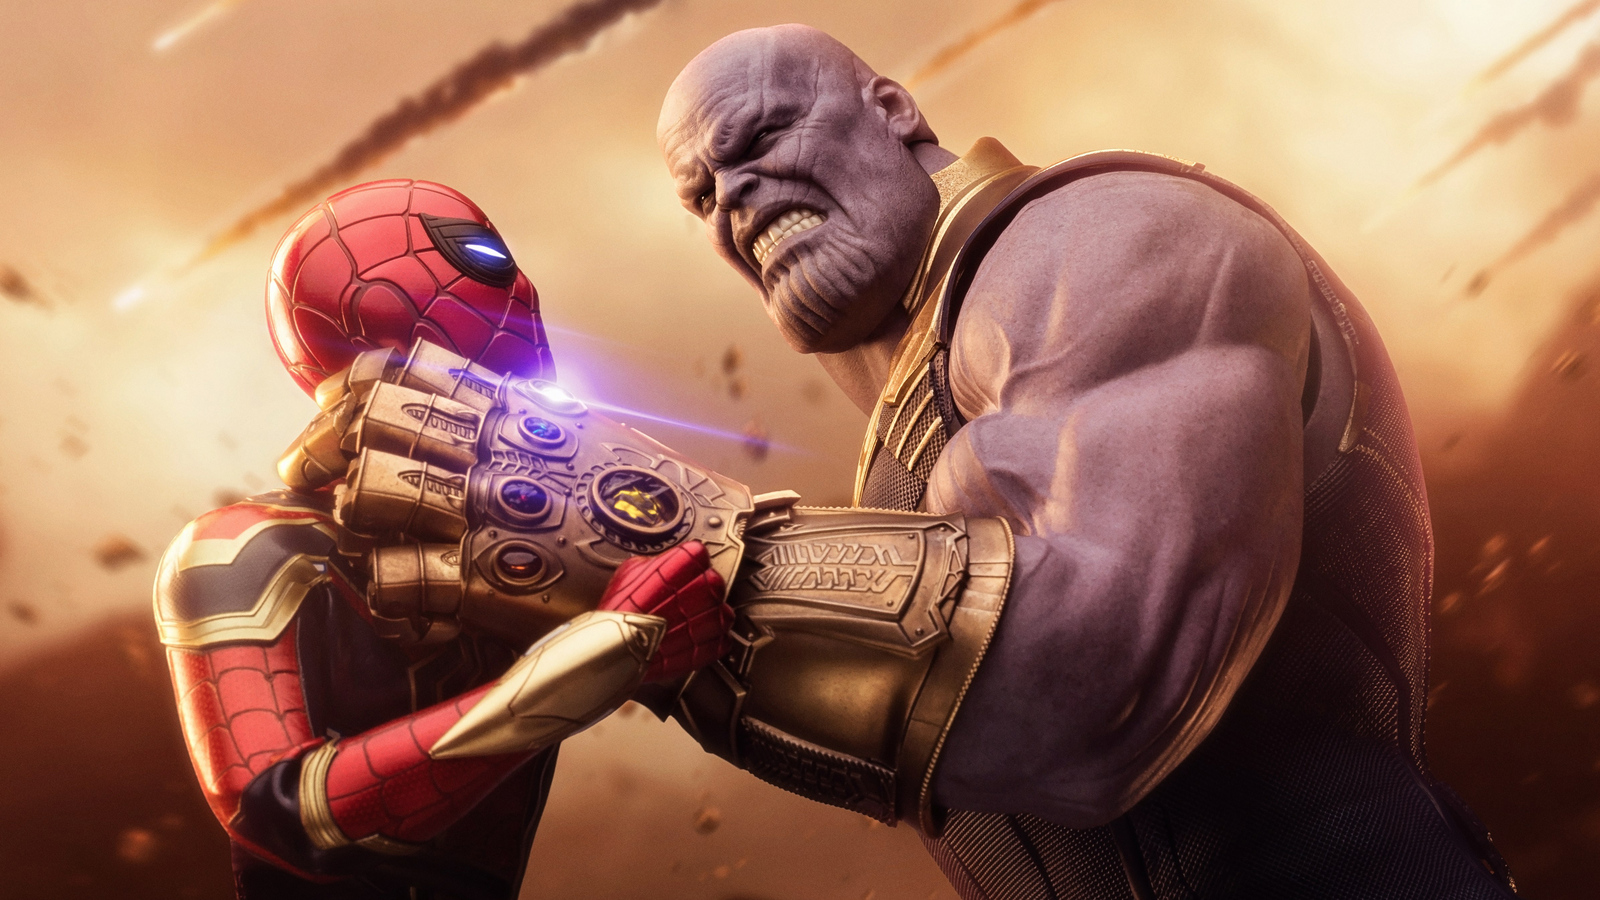 All The Avengers Fighting Thanos - Avengers Infinity War Artwork Wallpapers